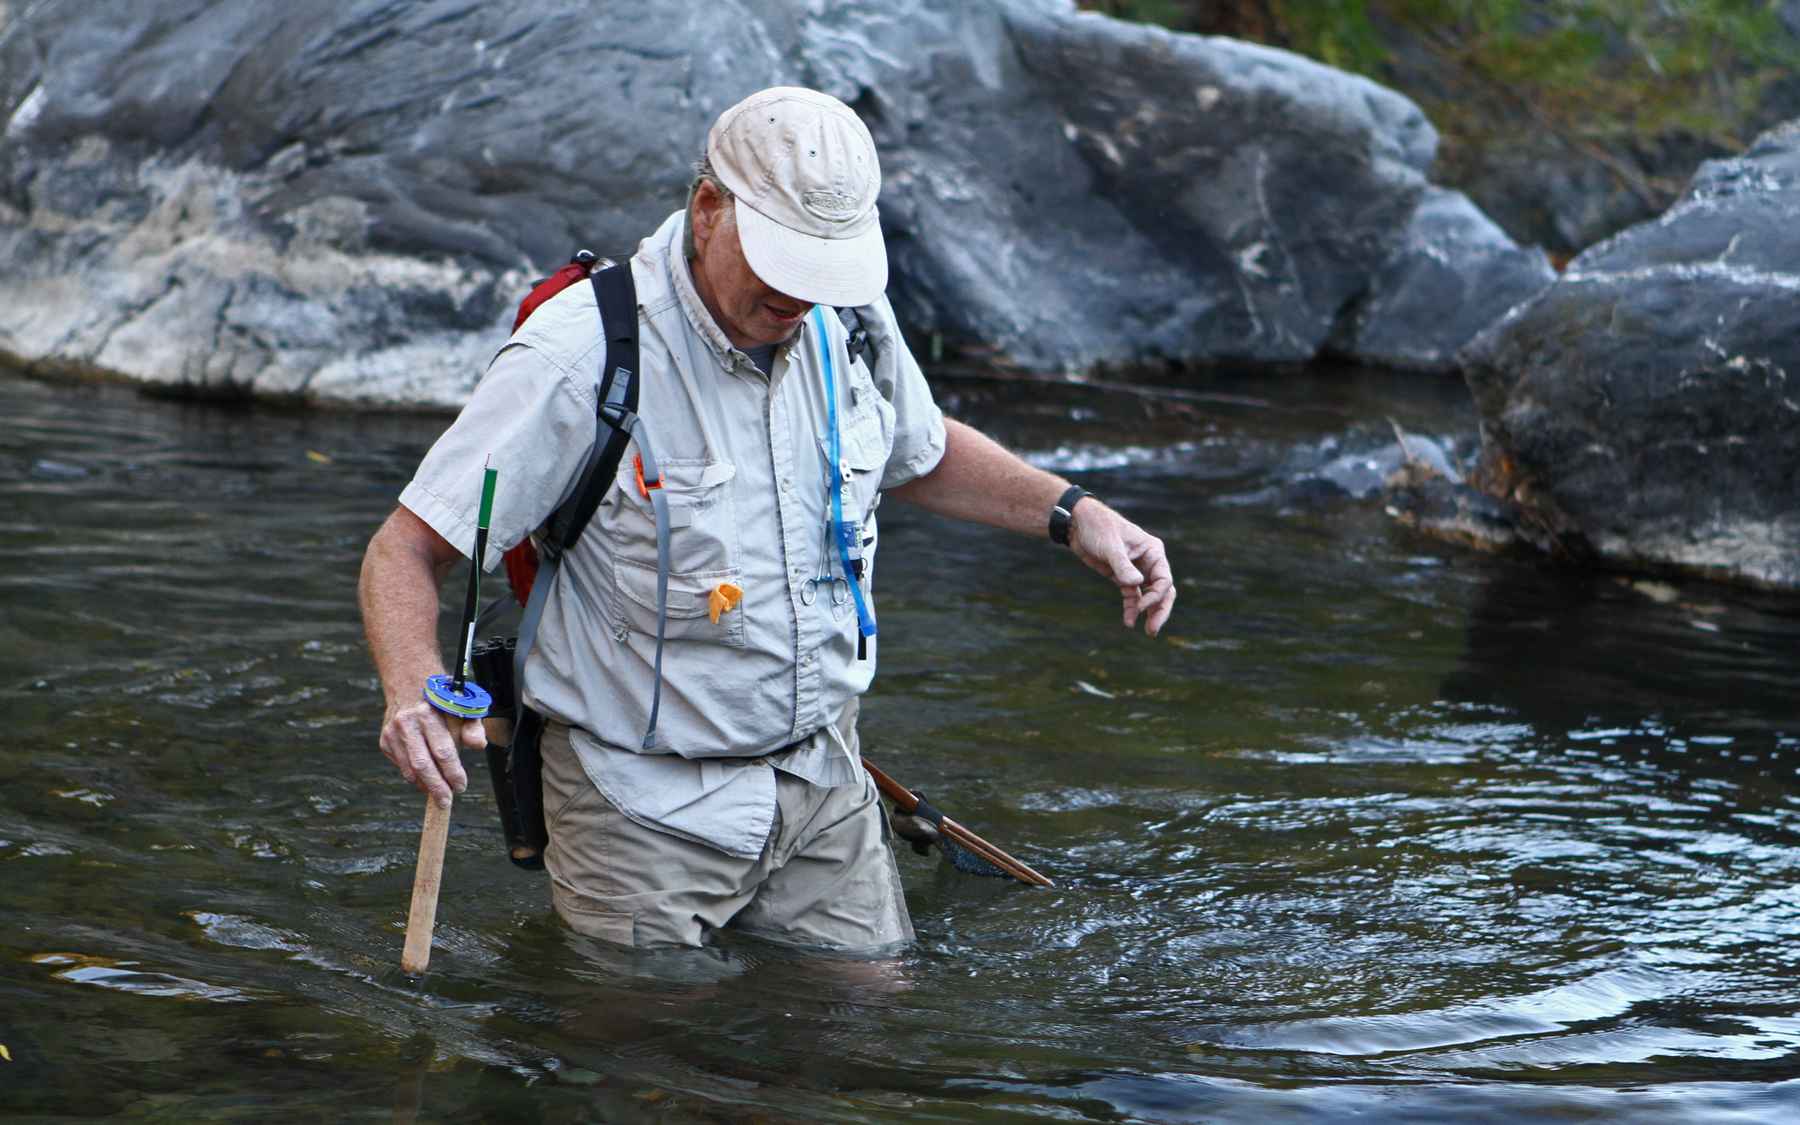 Patagonia Simple Fly Fishing: Techniques For Tenkara And Rod